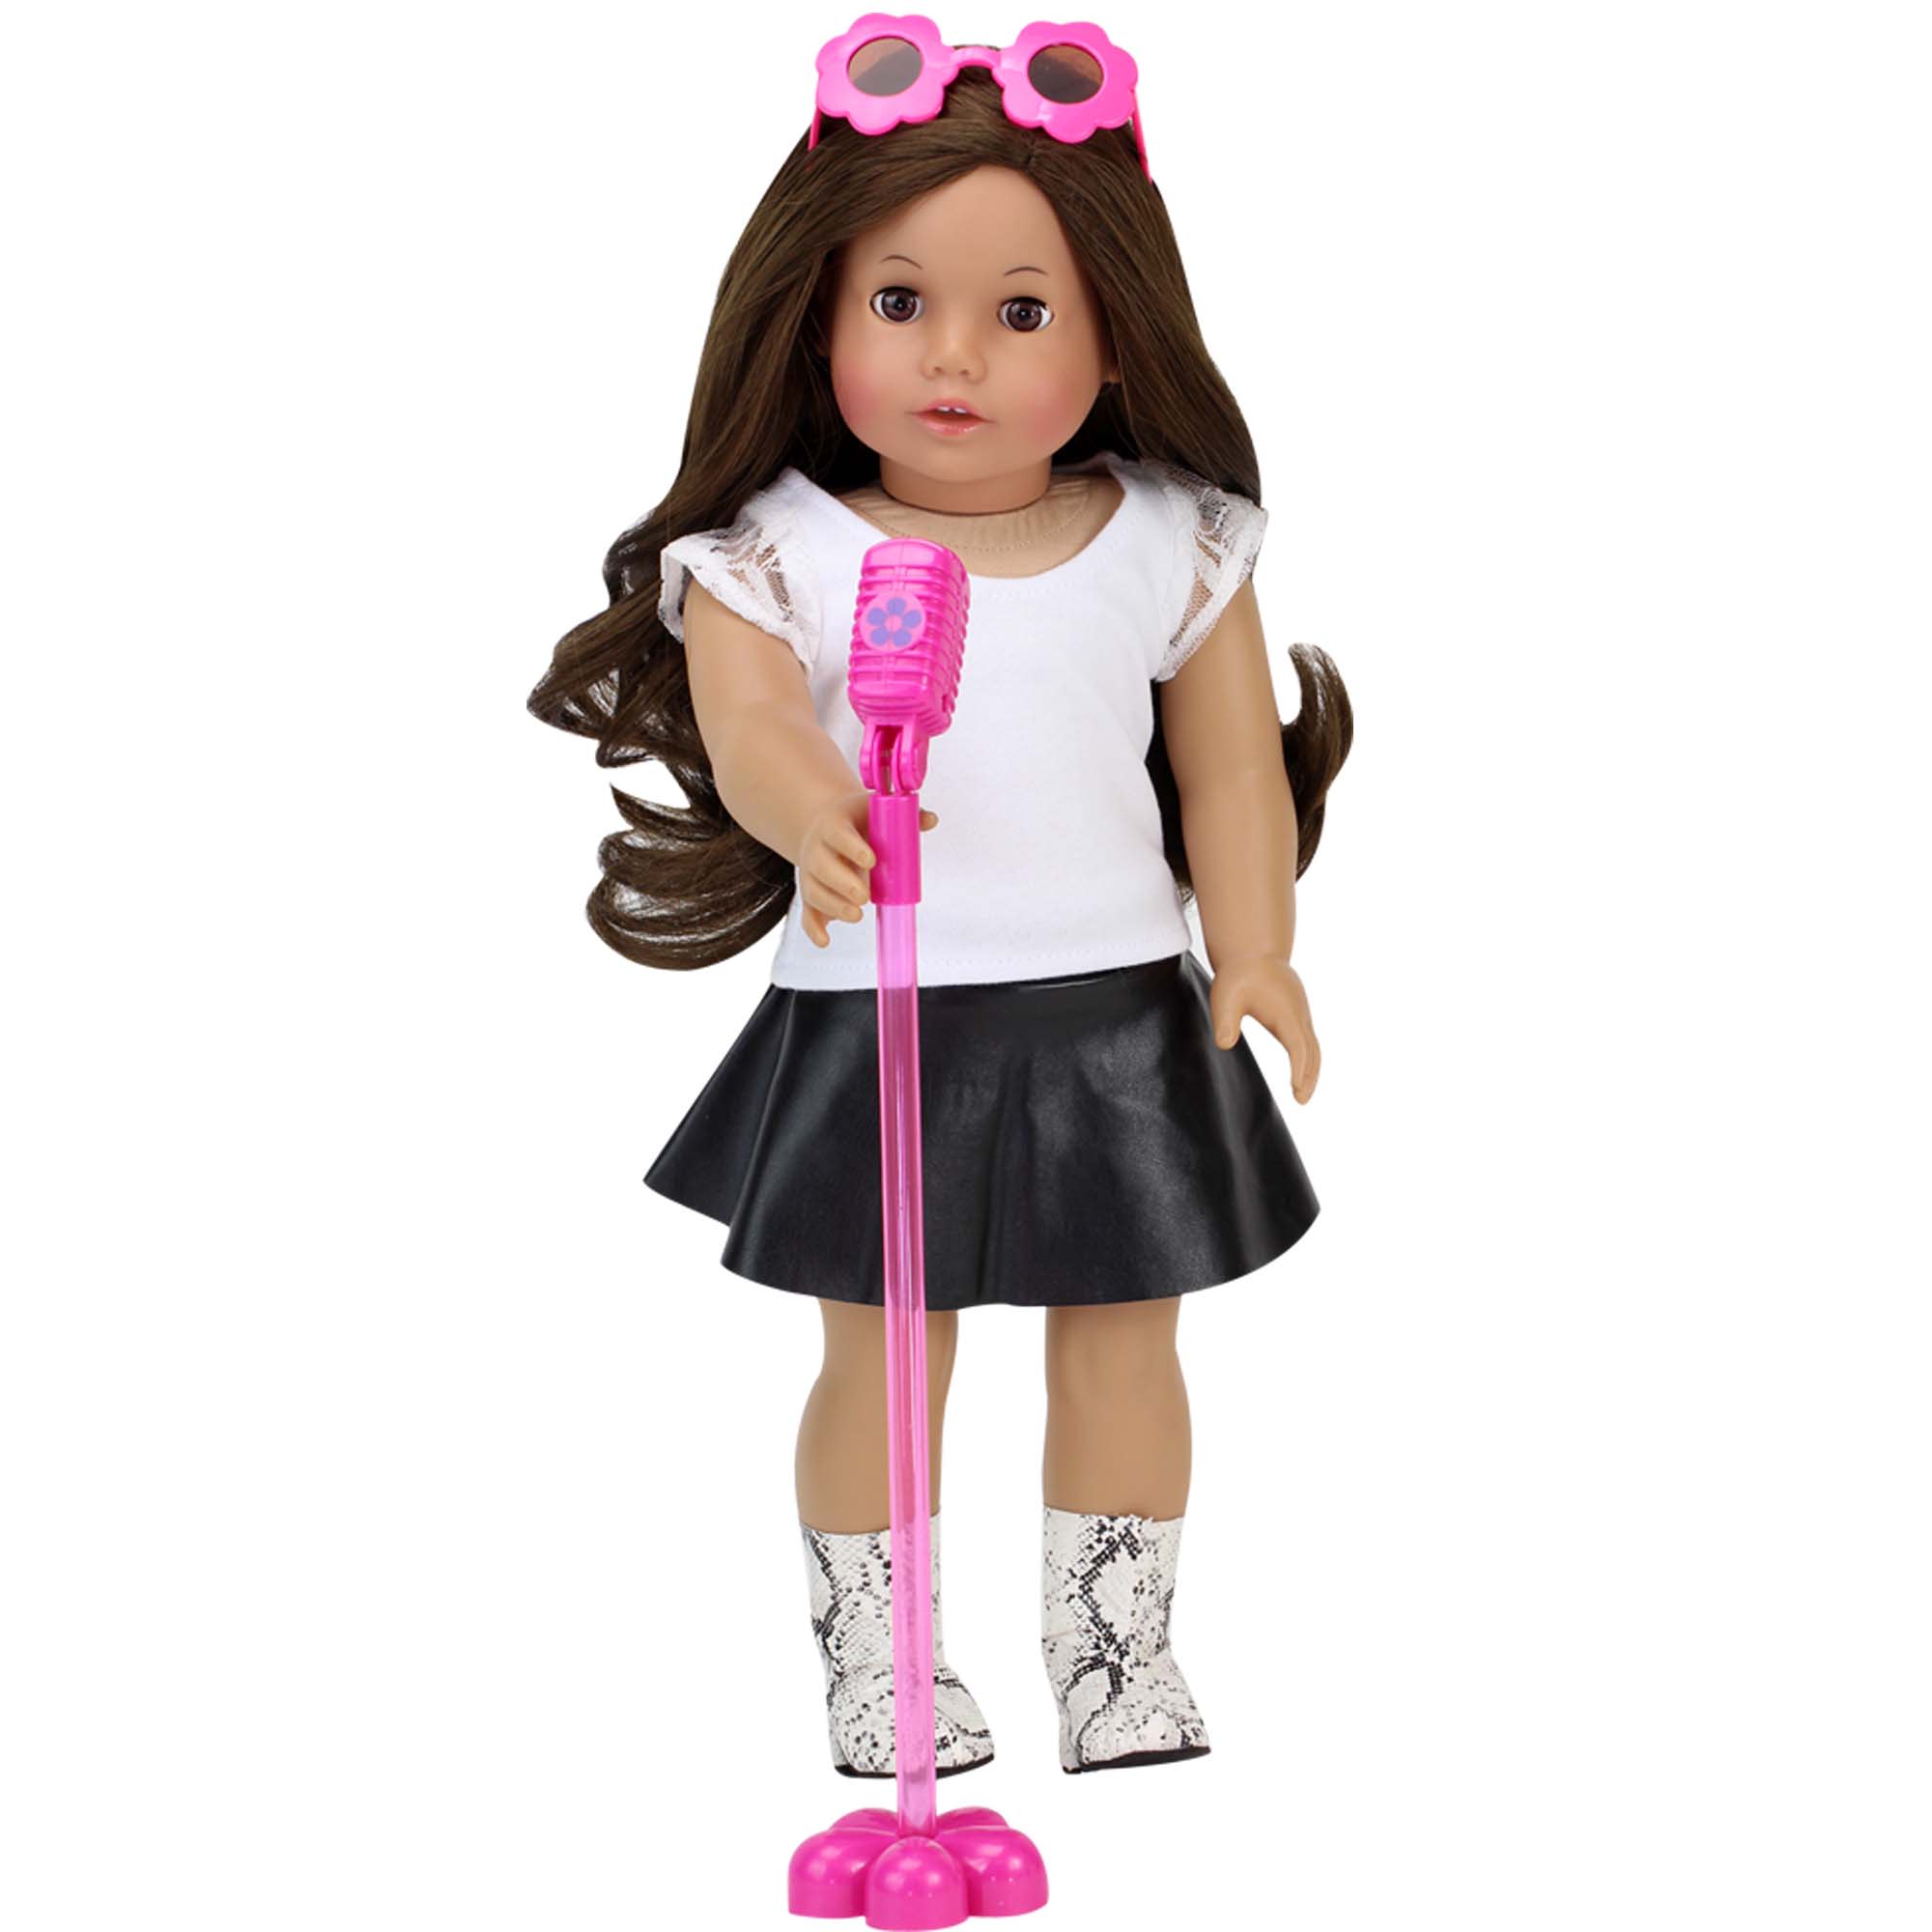 Sophia's Rock 'n Roll Music Set with Guitar, Sunglasses and Microphone for 18" Dolls, Pink